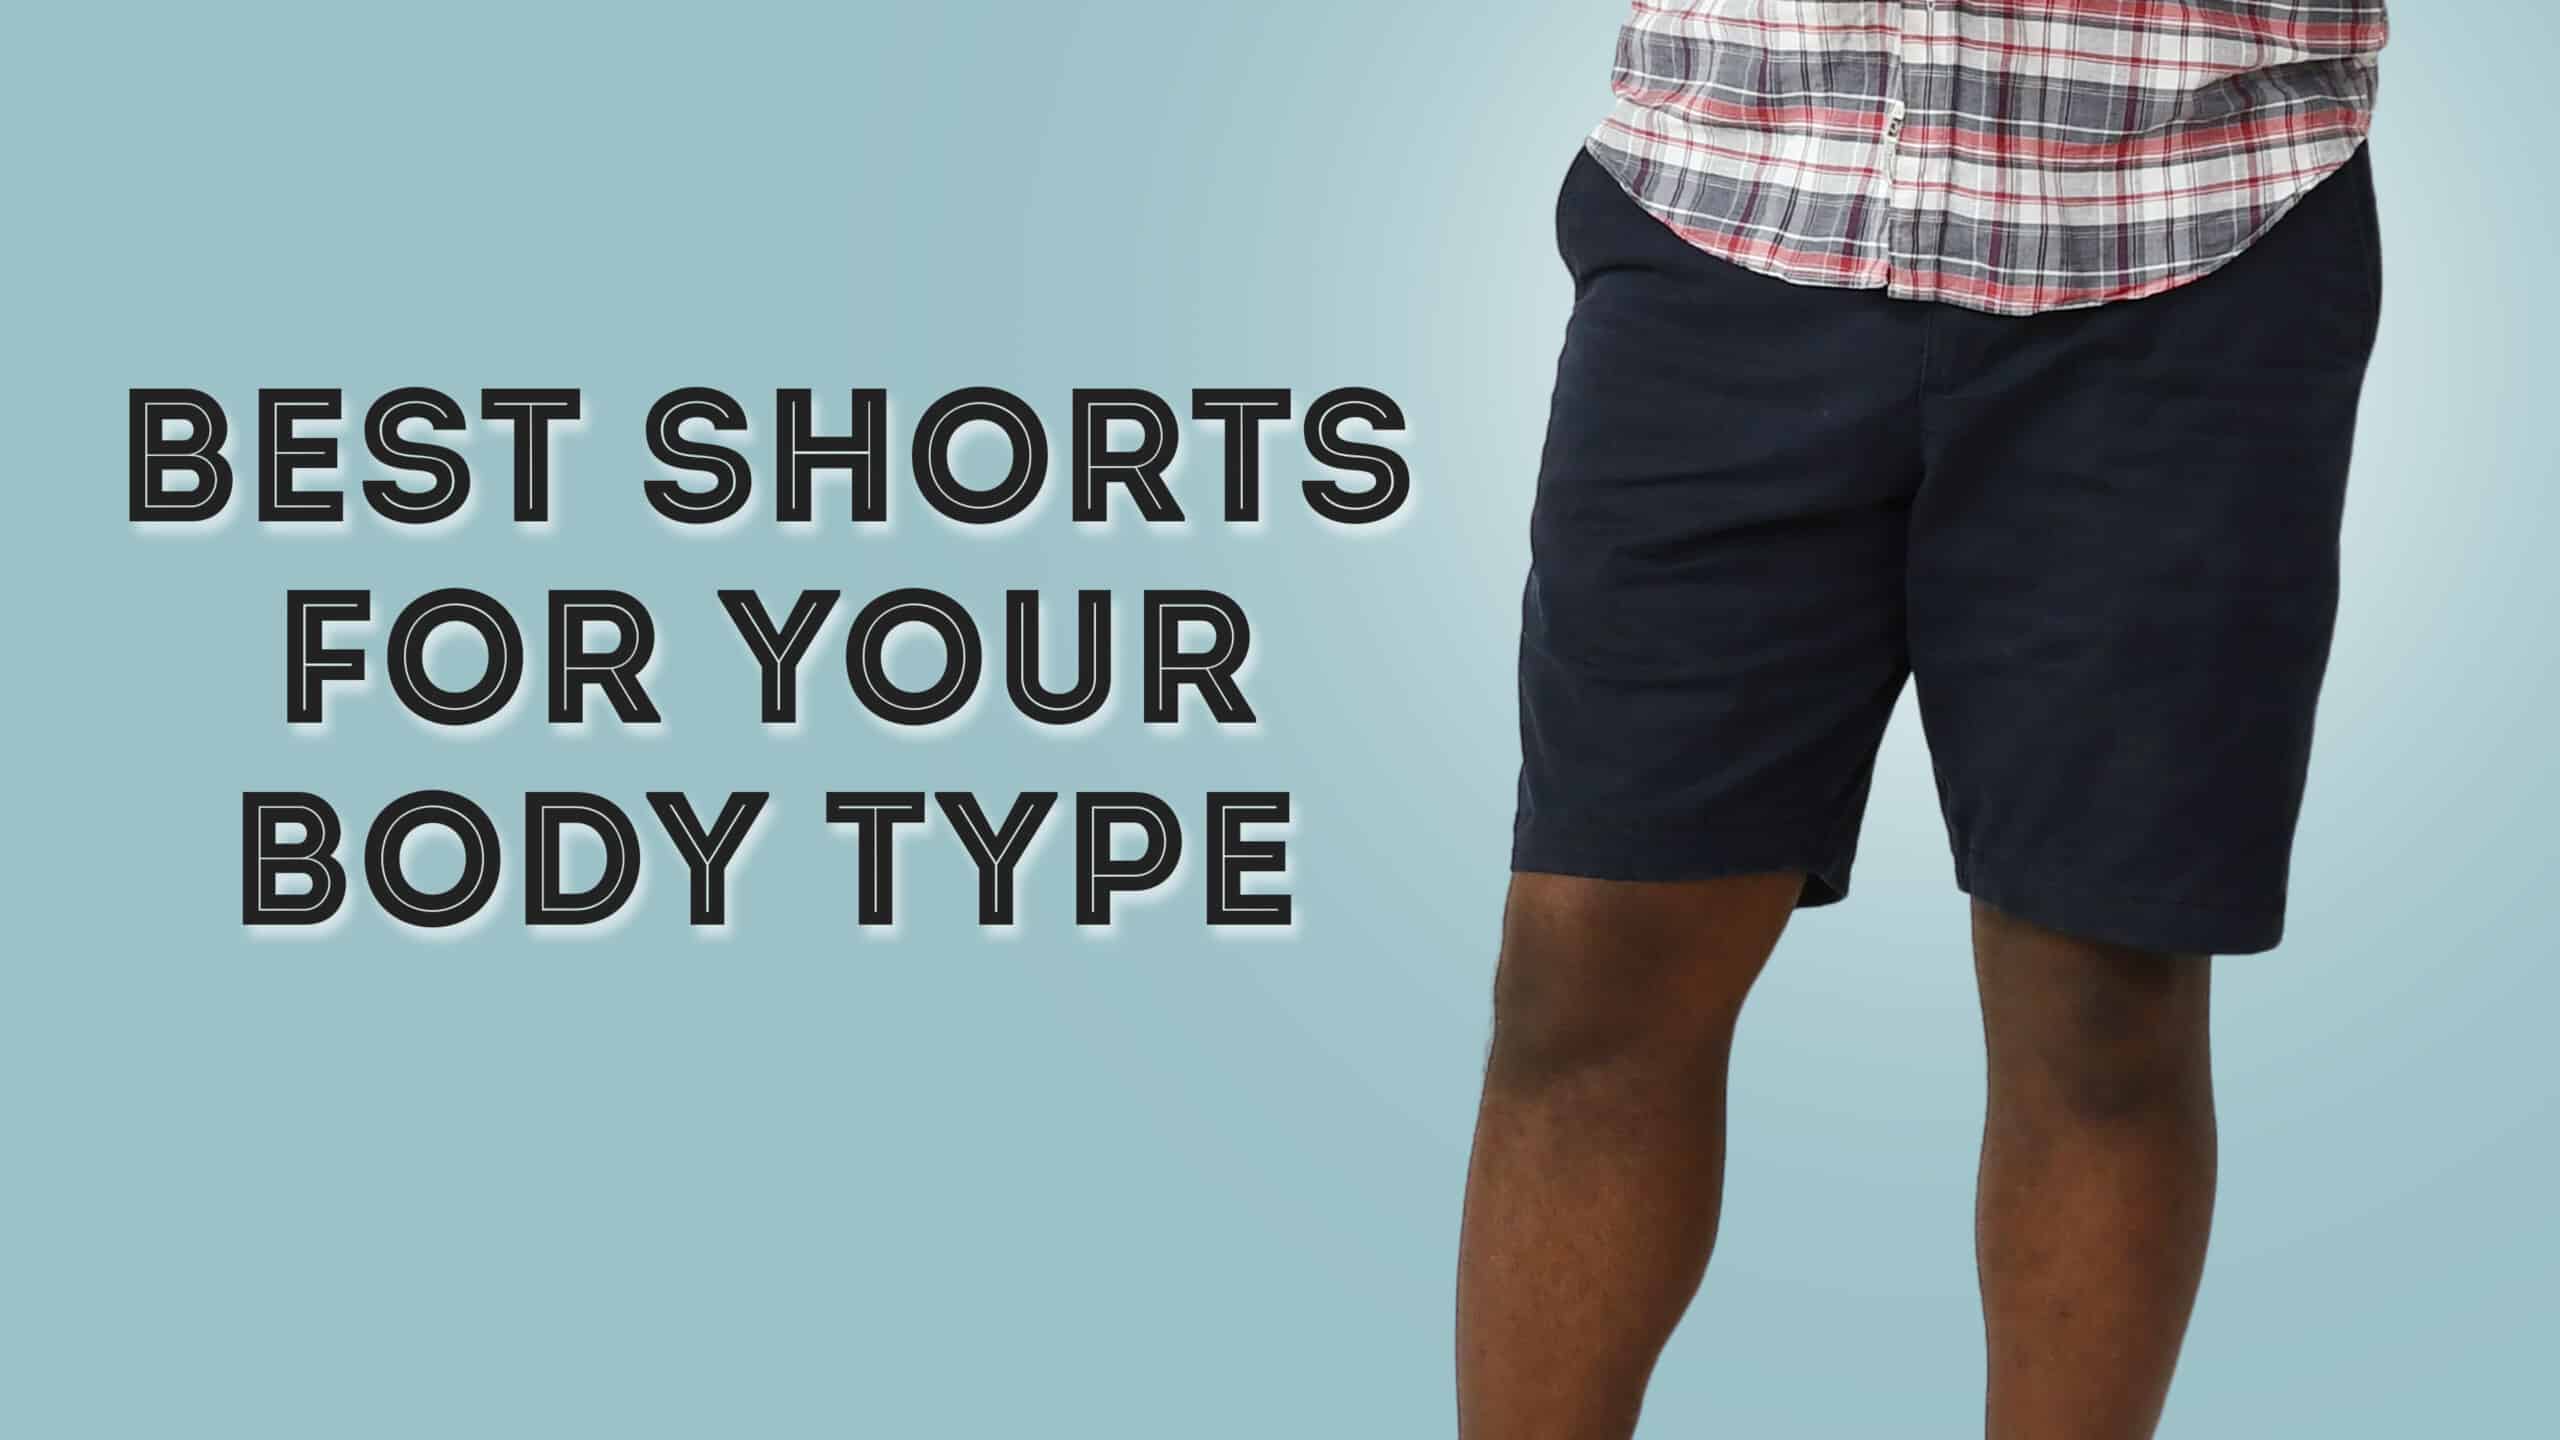 delvist nordøst Settle How To Find The Best Shorts For Your Style & Body Type | Gentleman's Gazette